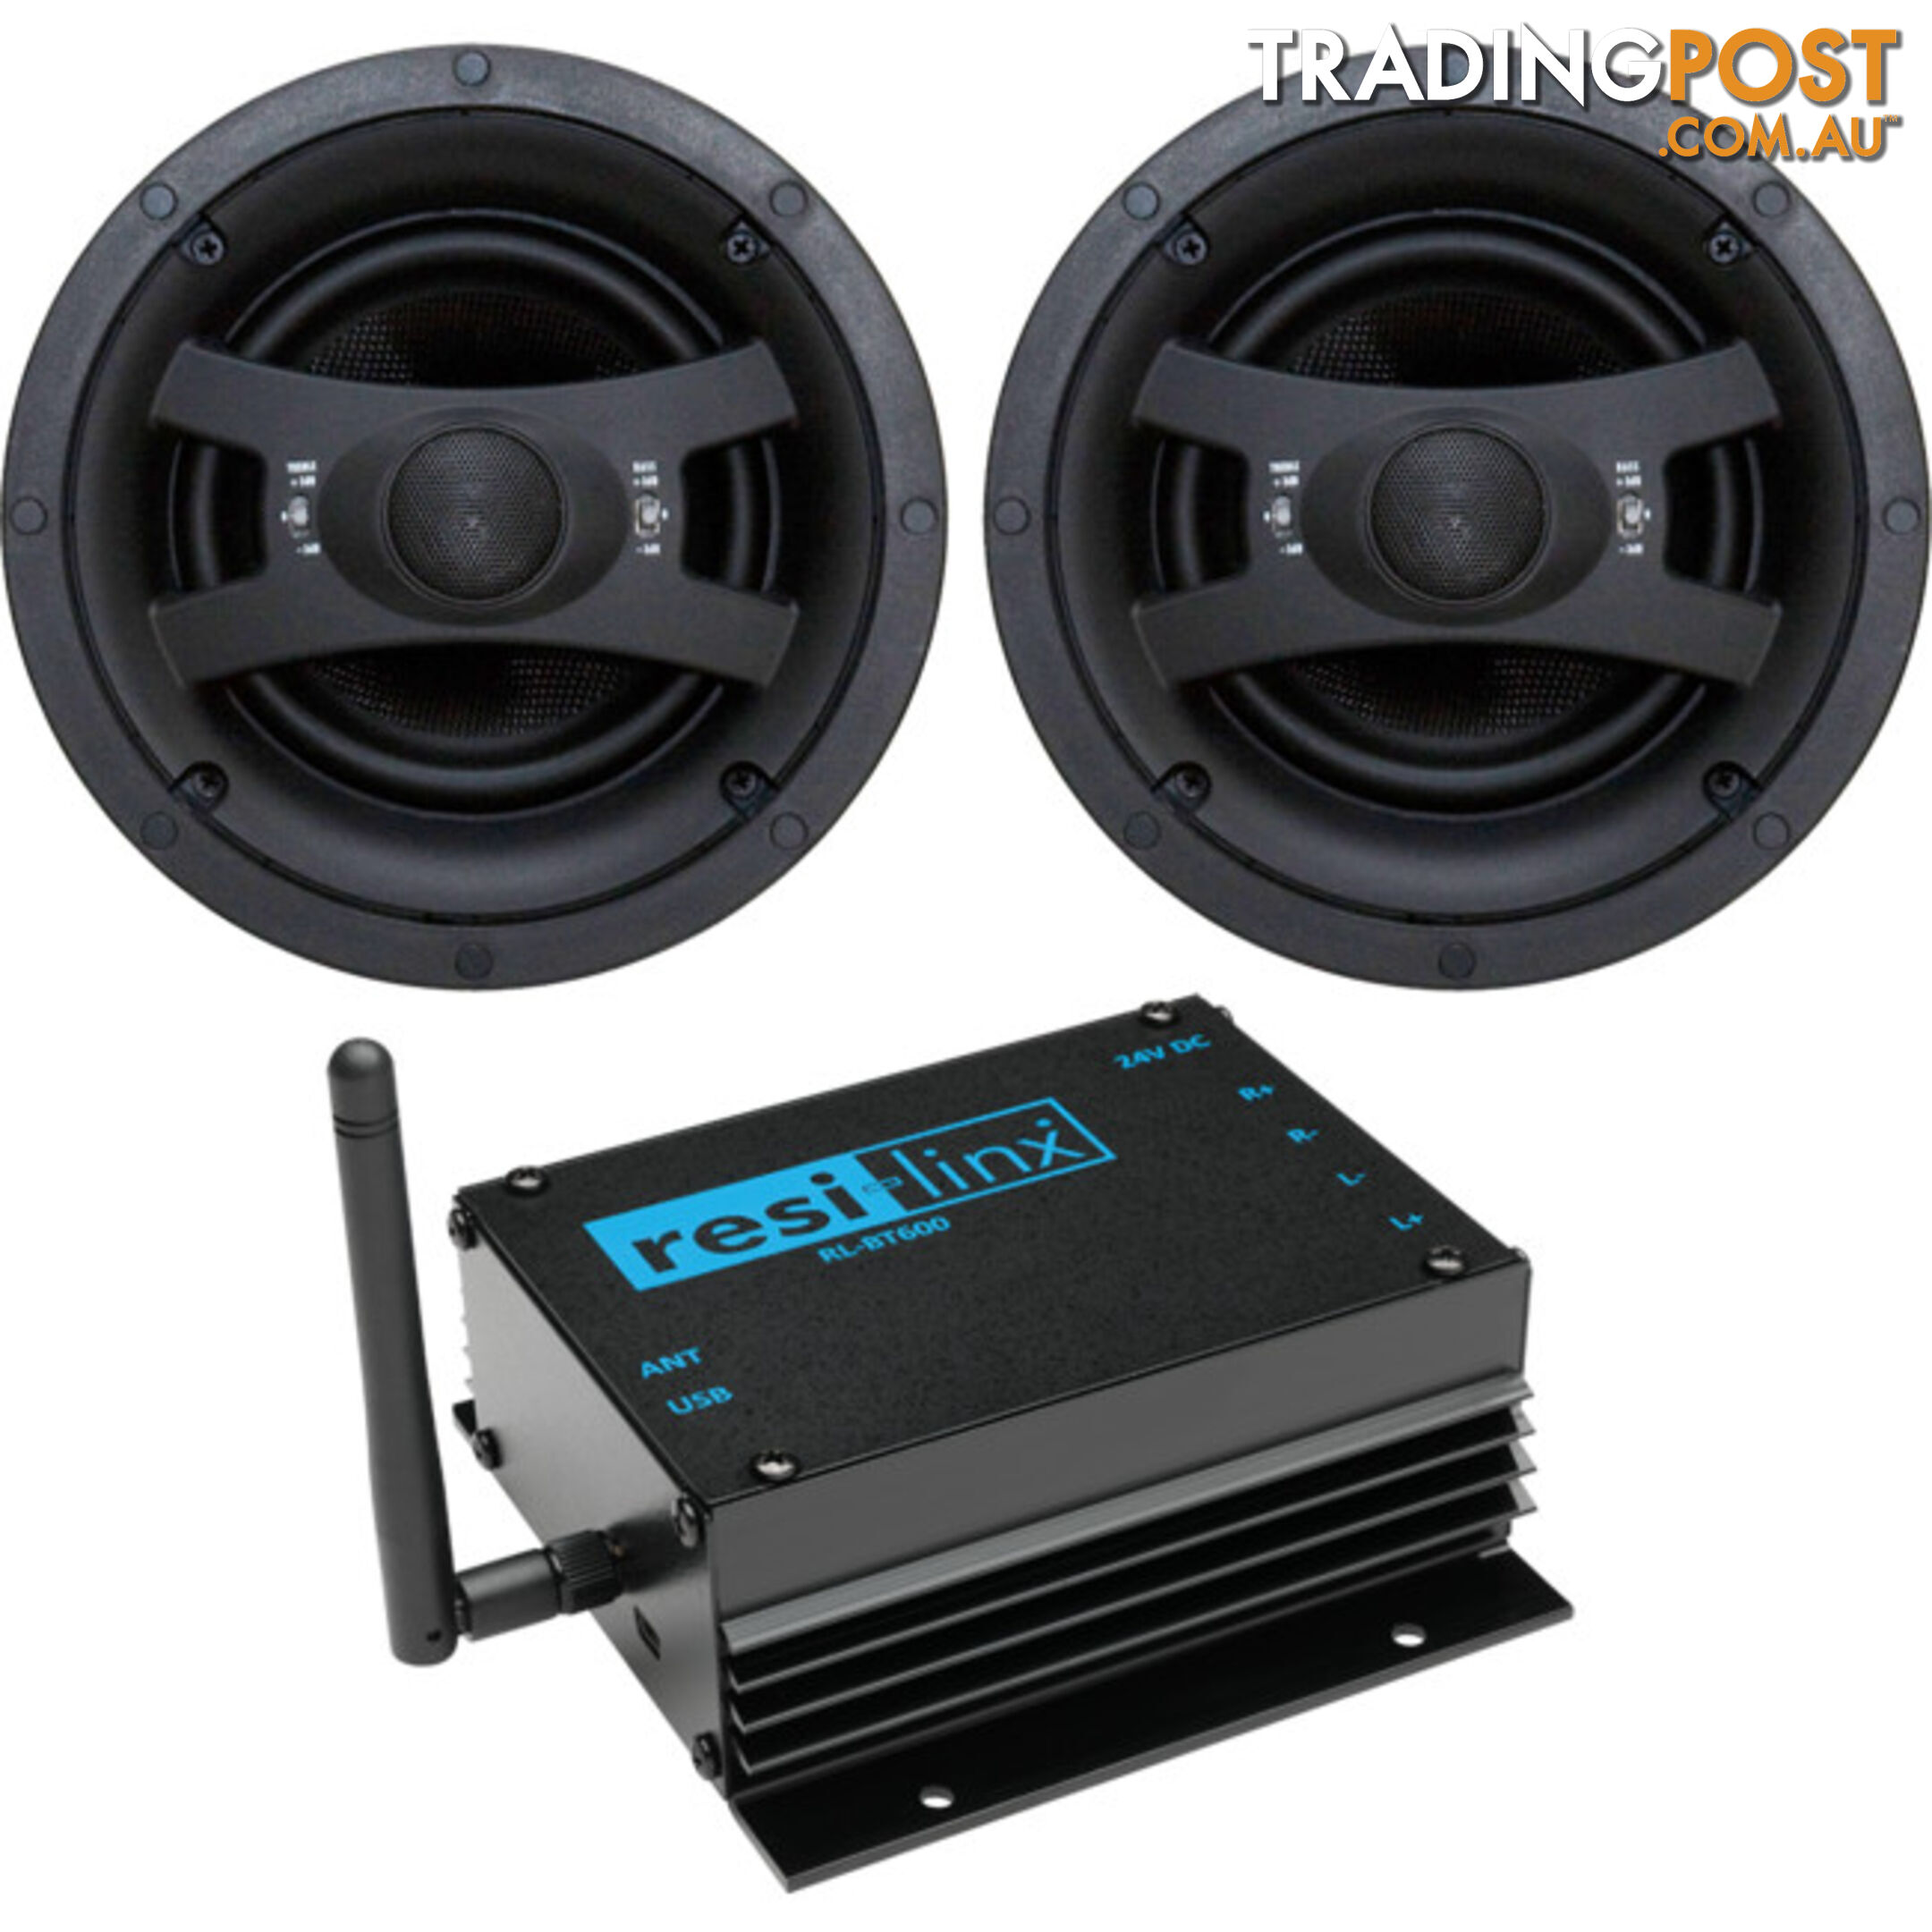 RLBT650 6.5" ACTIVE CEILING SPEAKERS 50W PER CH WITH BLUETOOTH